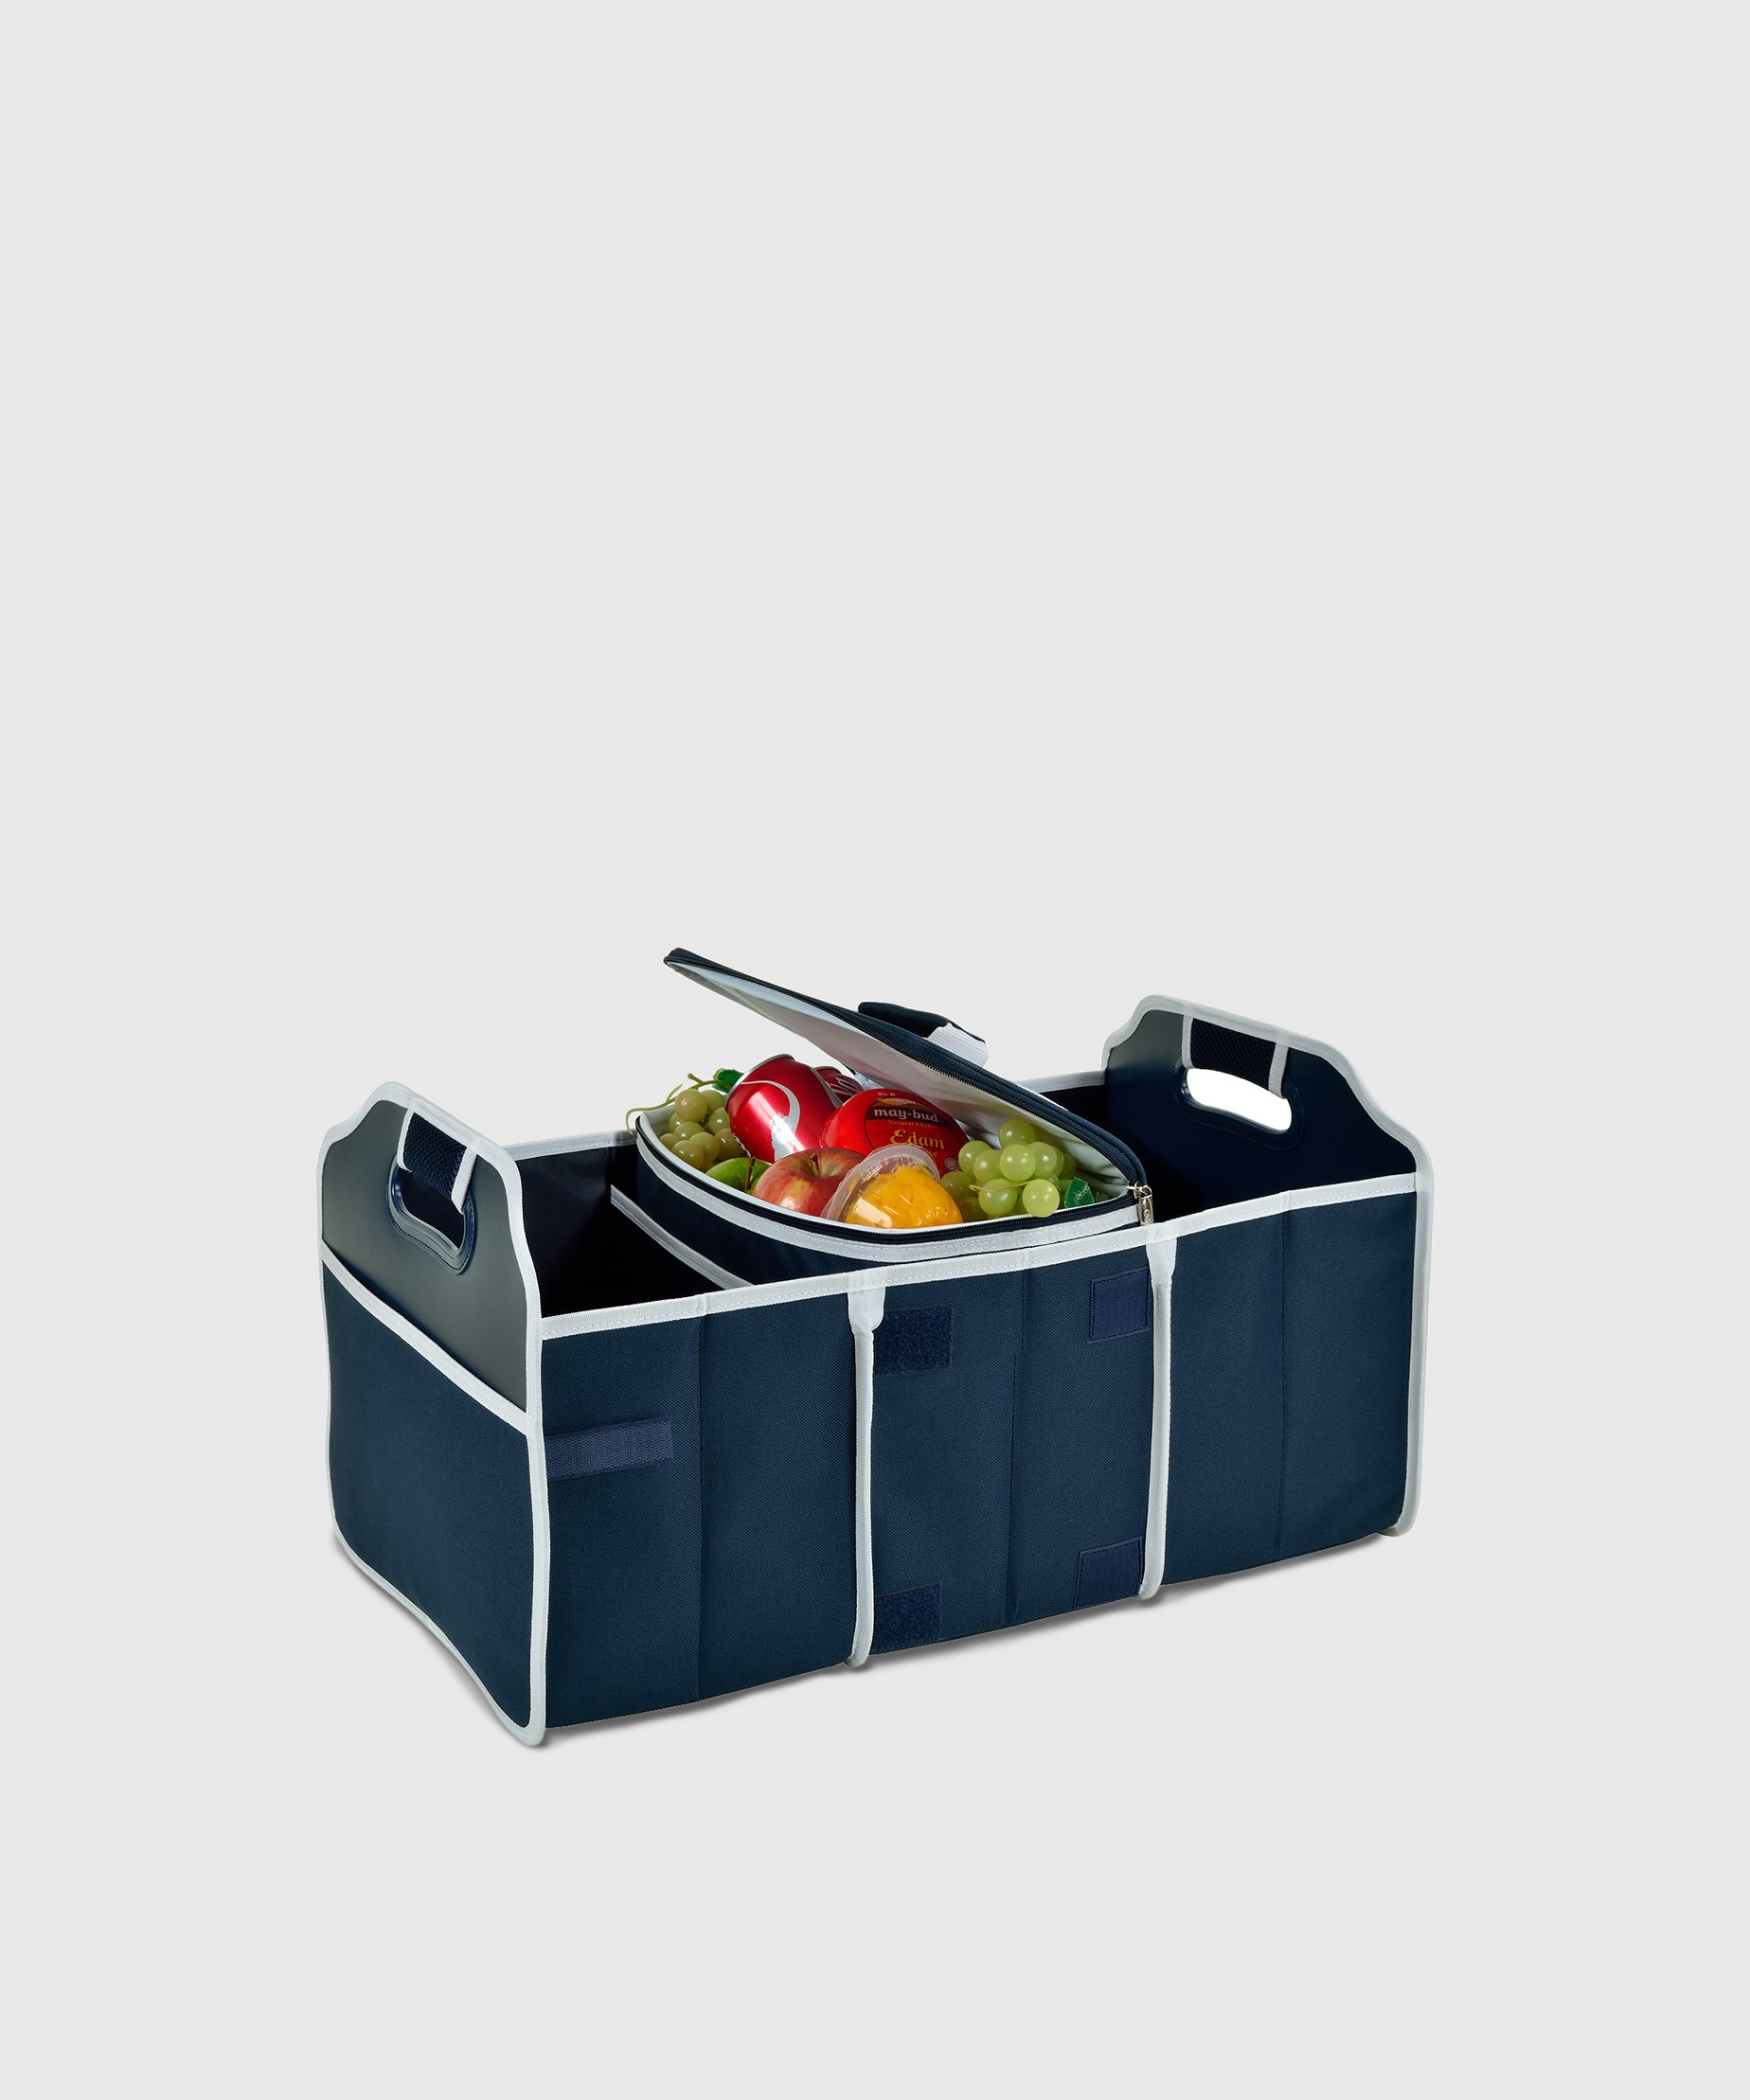 Trunk Organiser Boot Storage Box Car Auto Products Car Boot